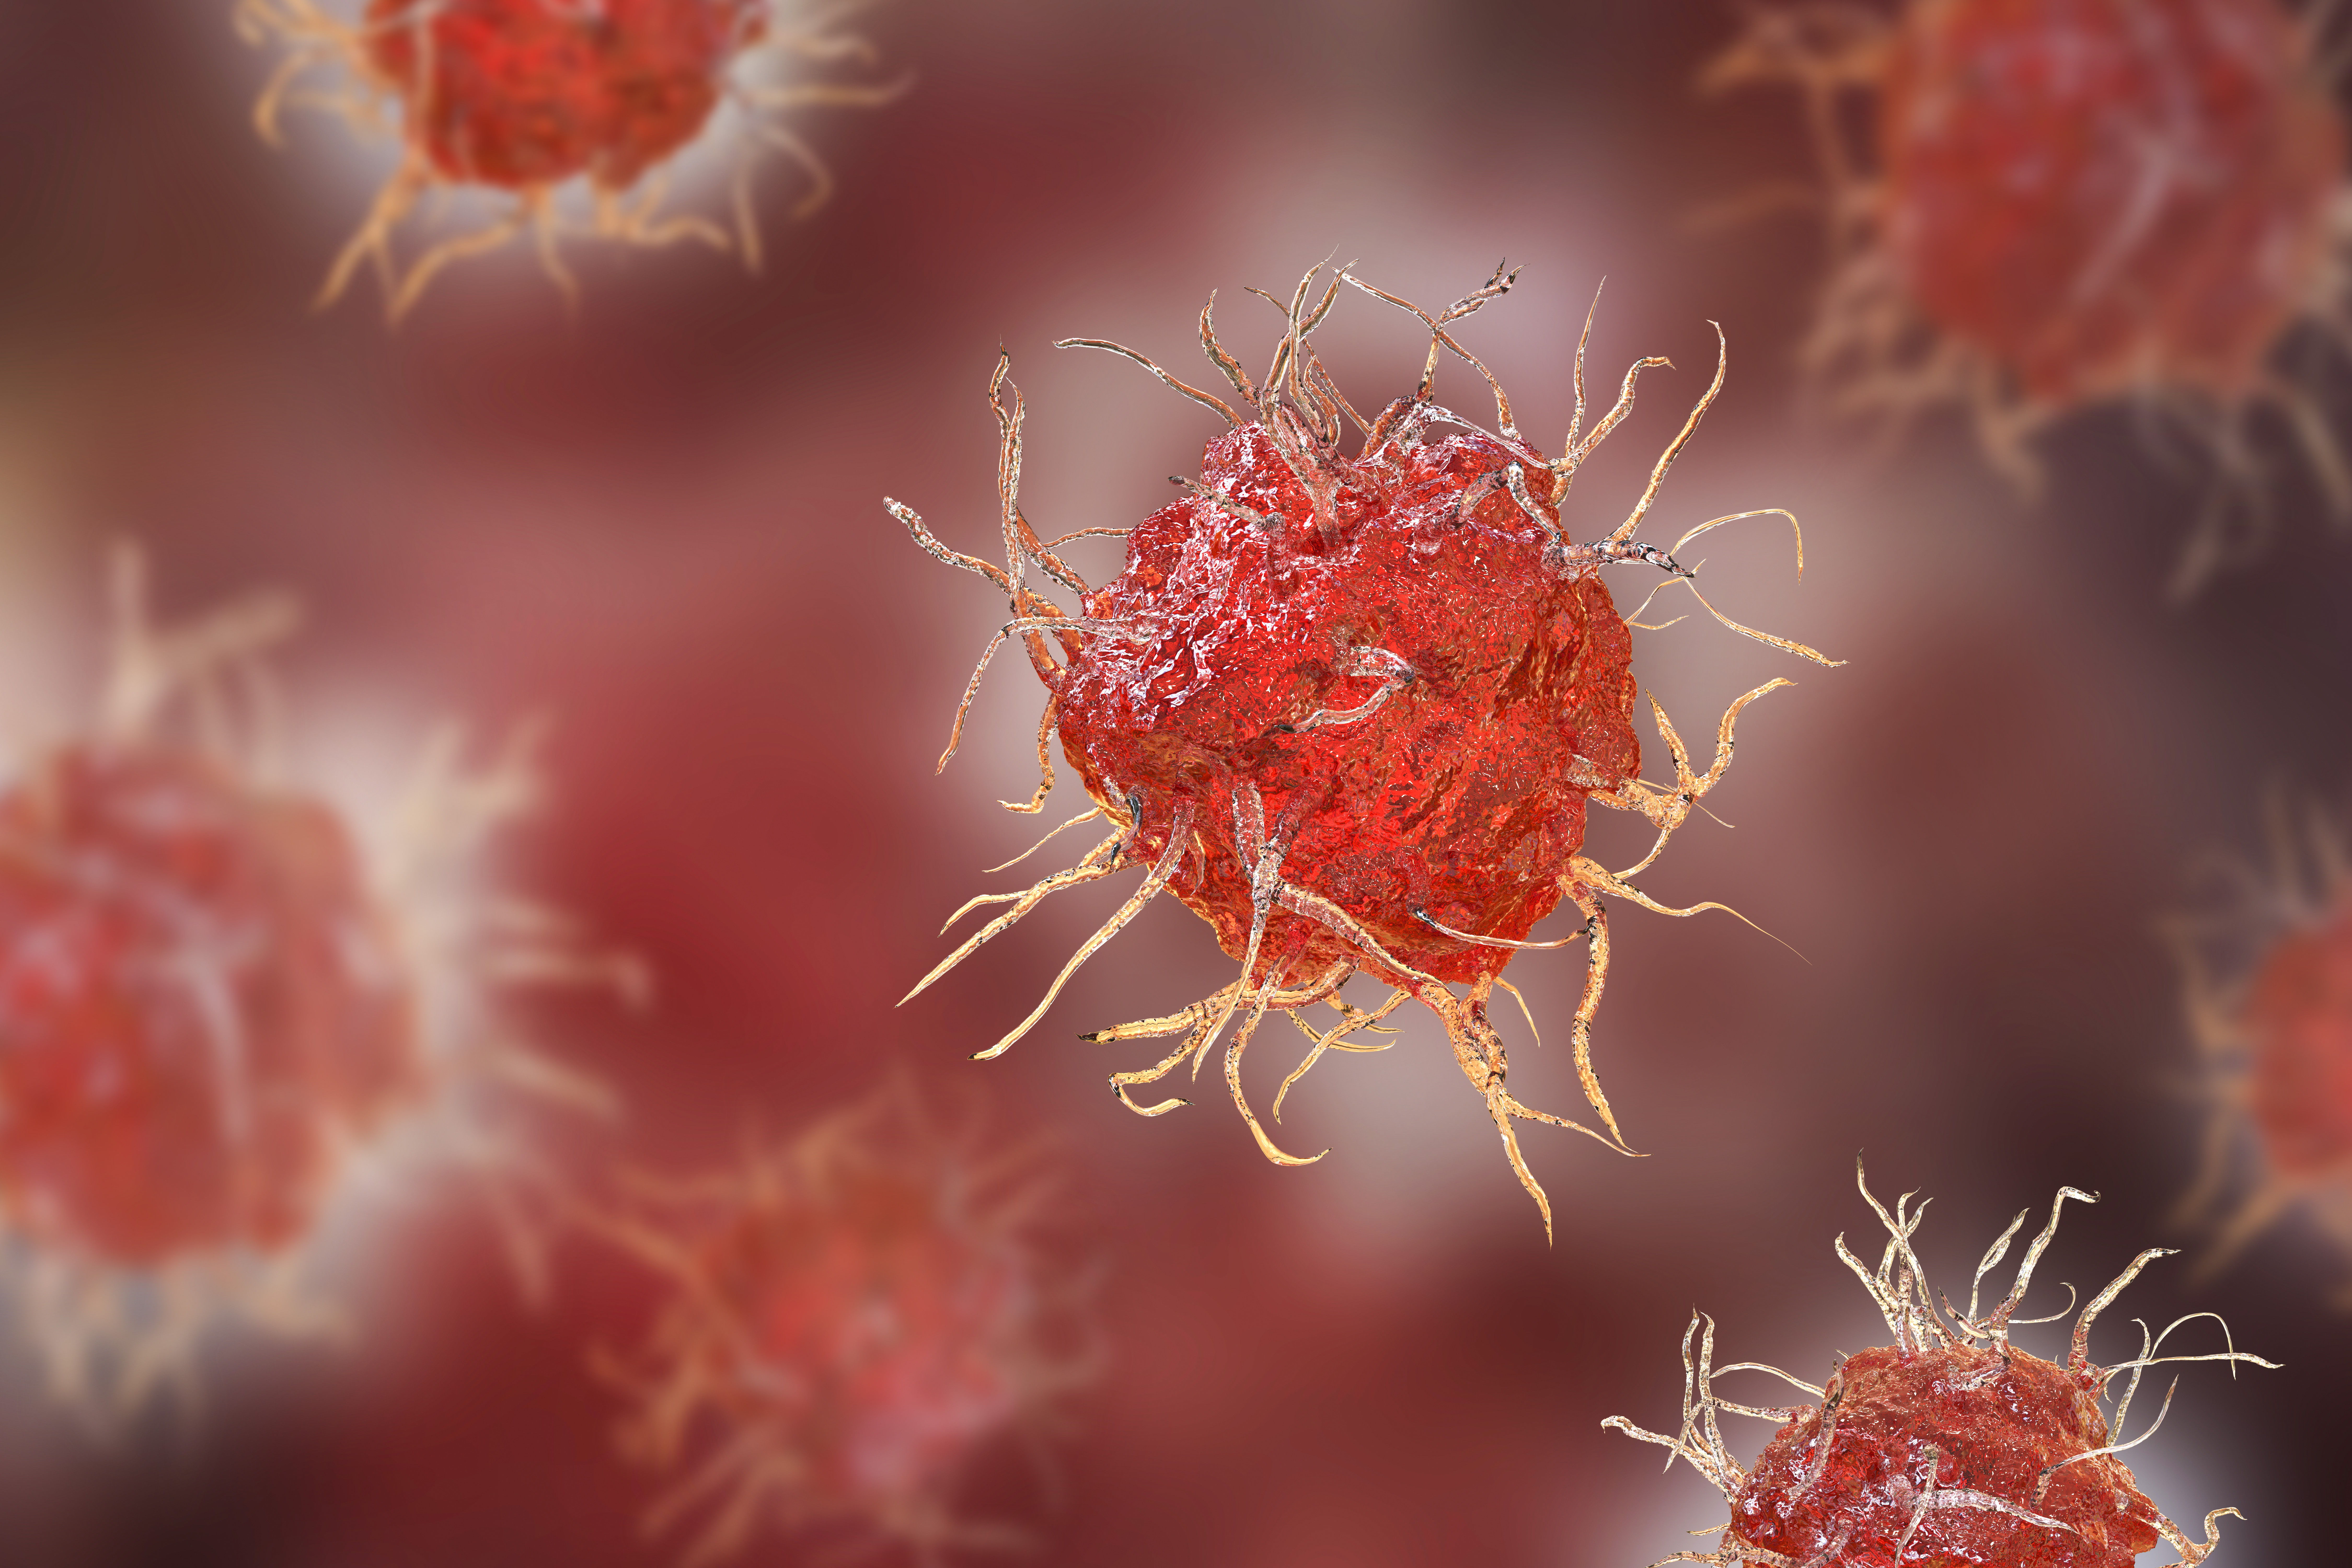 Illustration of a dendritic cell, an immune cell that presents antigens to T cells.